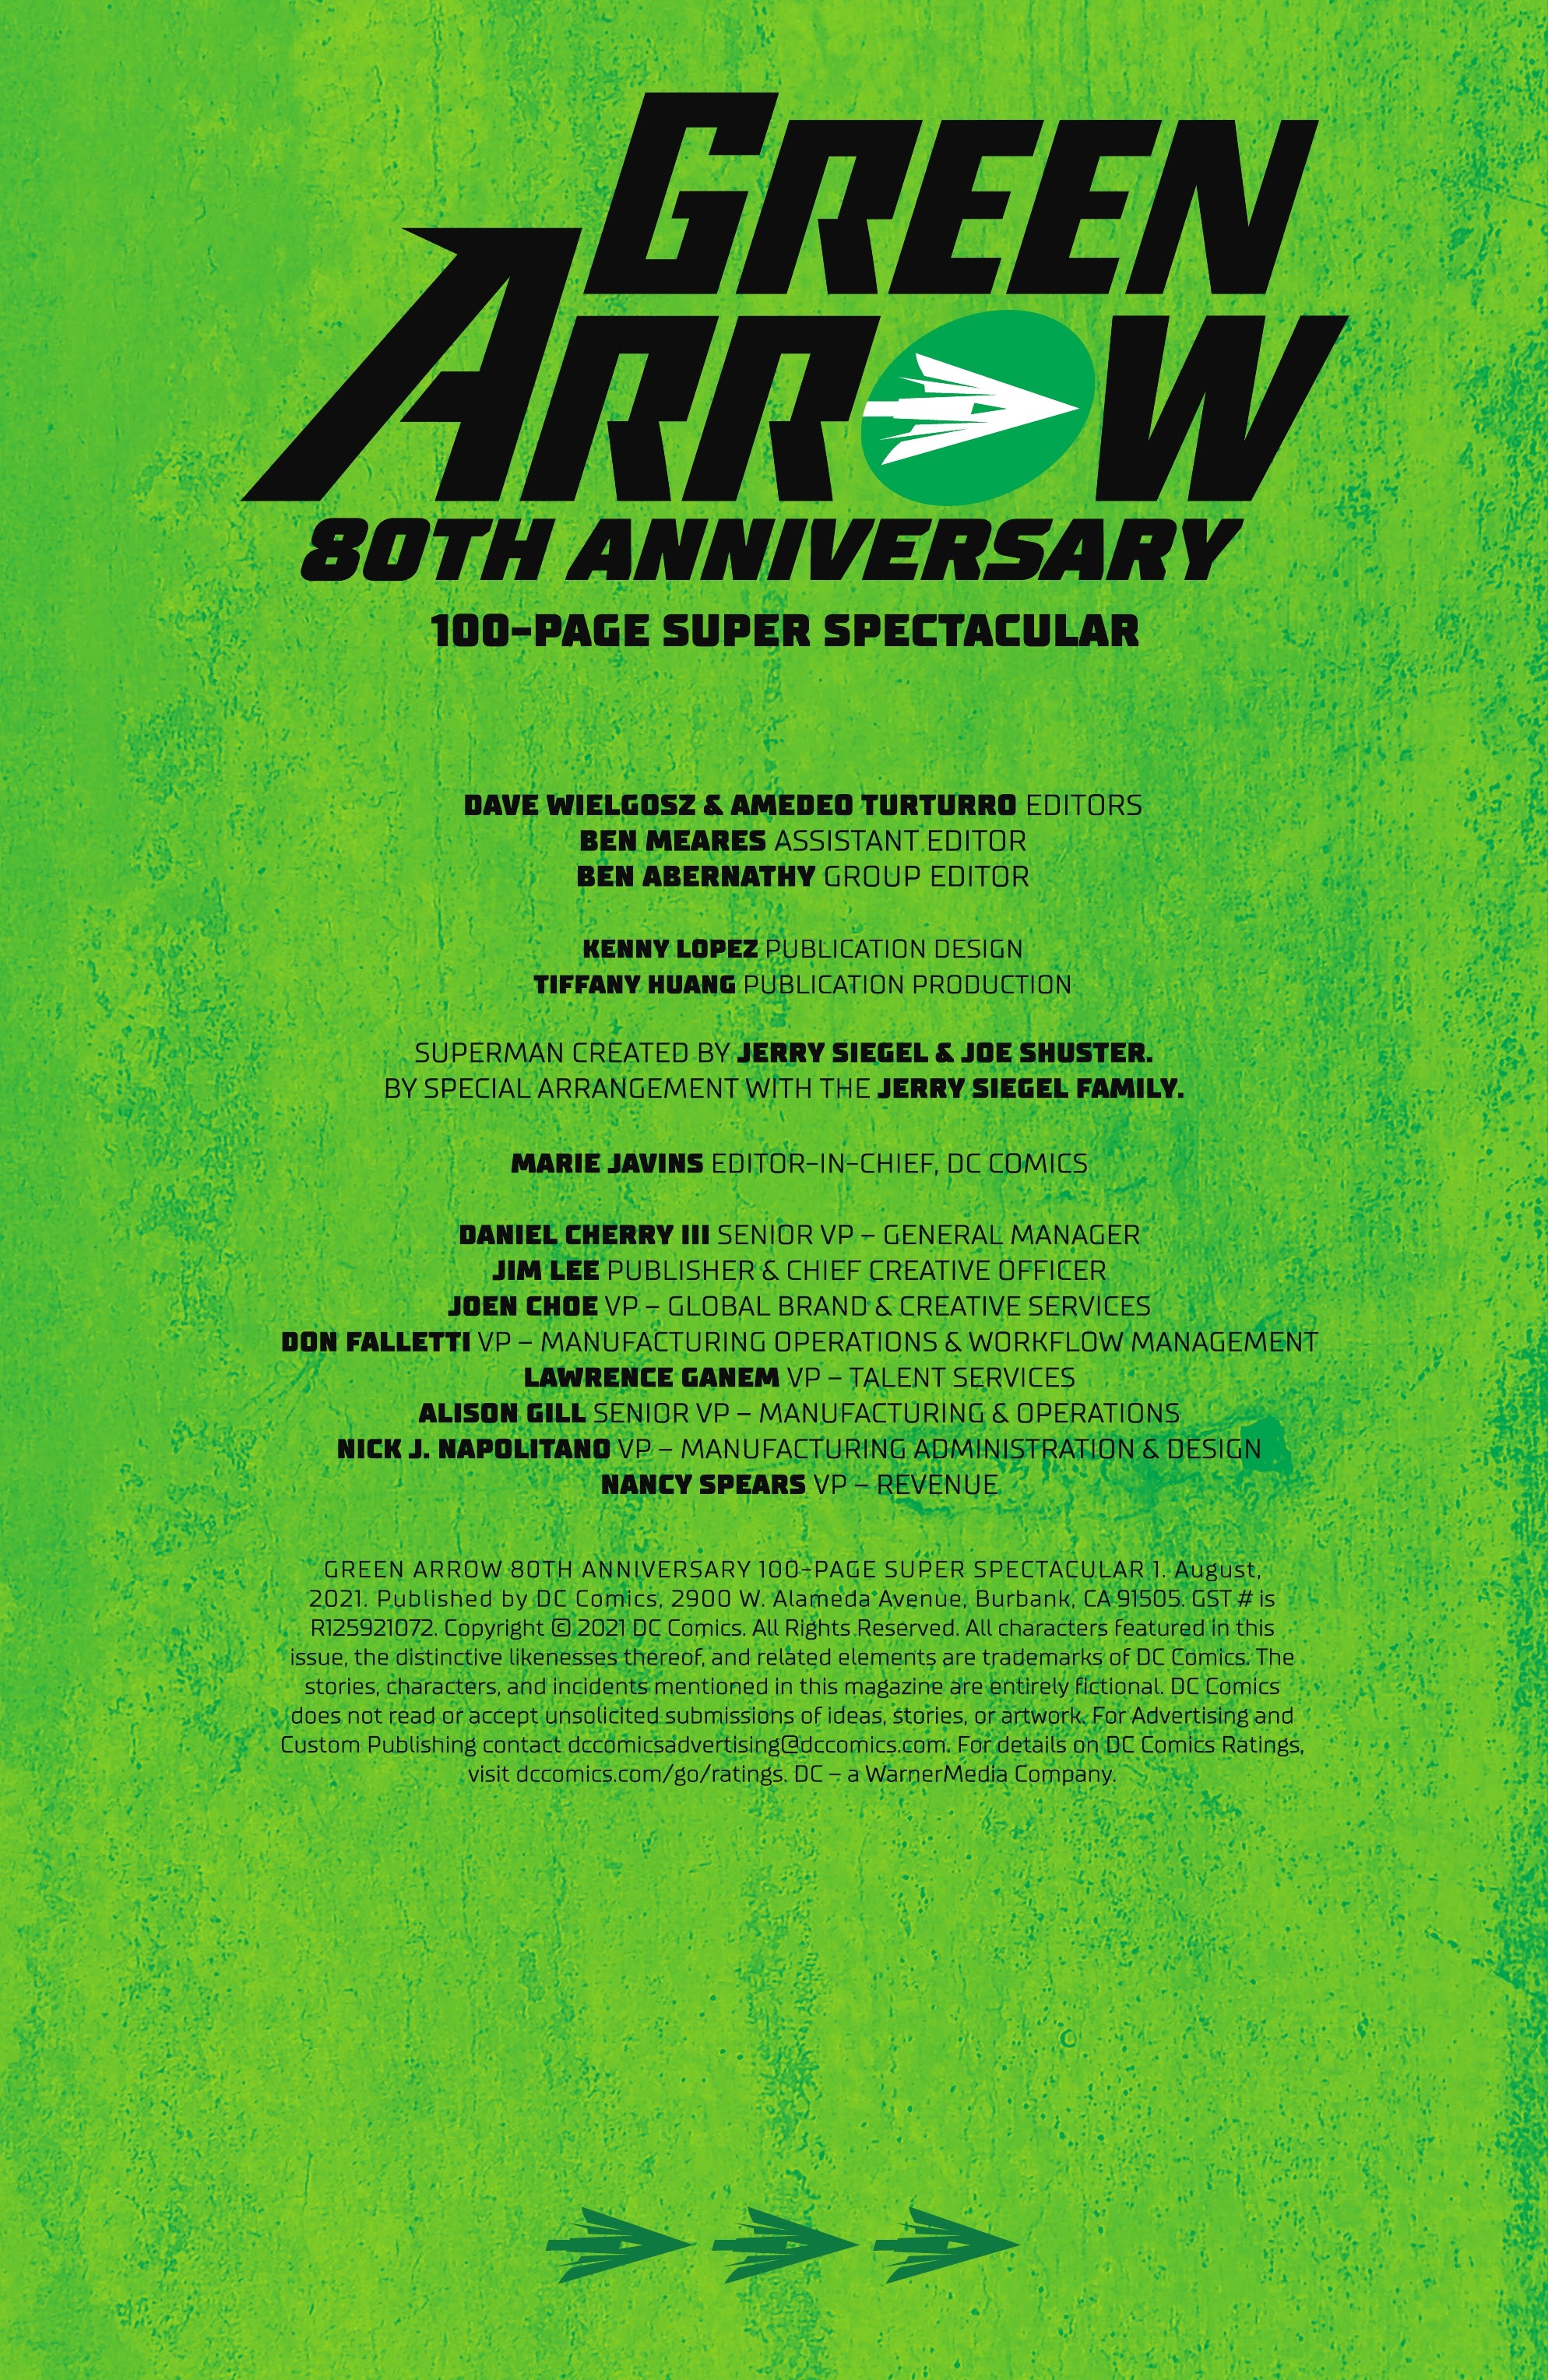 Read online Green Arrow 80th Anniversary 100-Page Super Spectacular comic -  Issue # TPB - 97